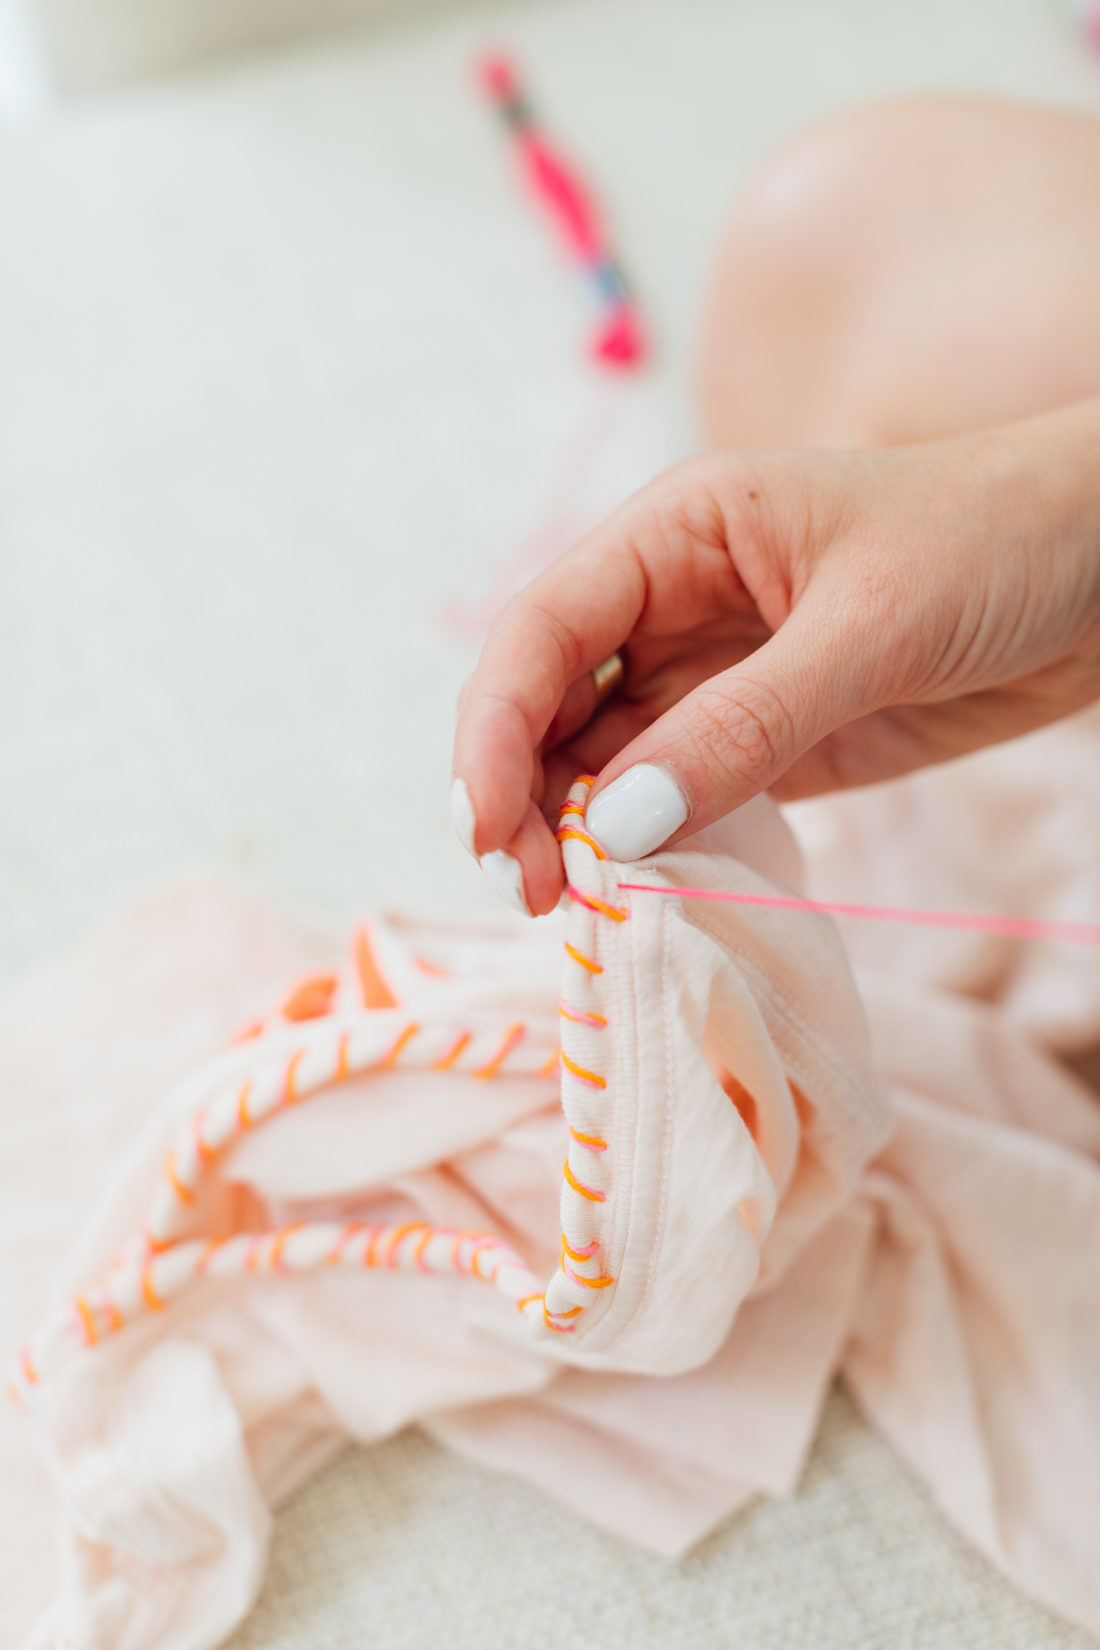 Eva Amurri Martino sewing a detail of thread on the collar of an old tee